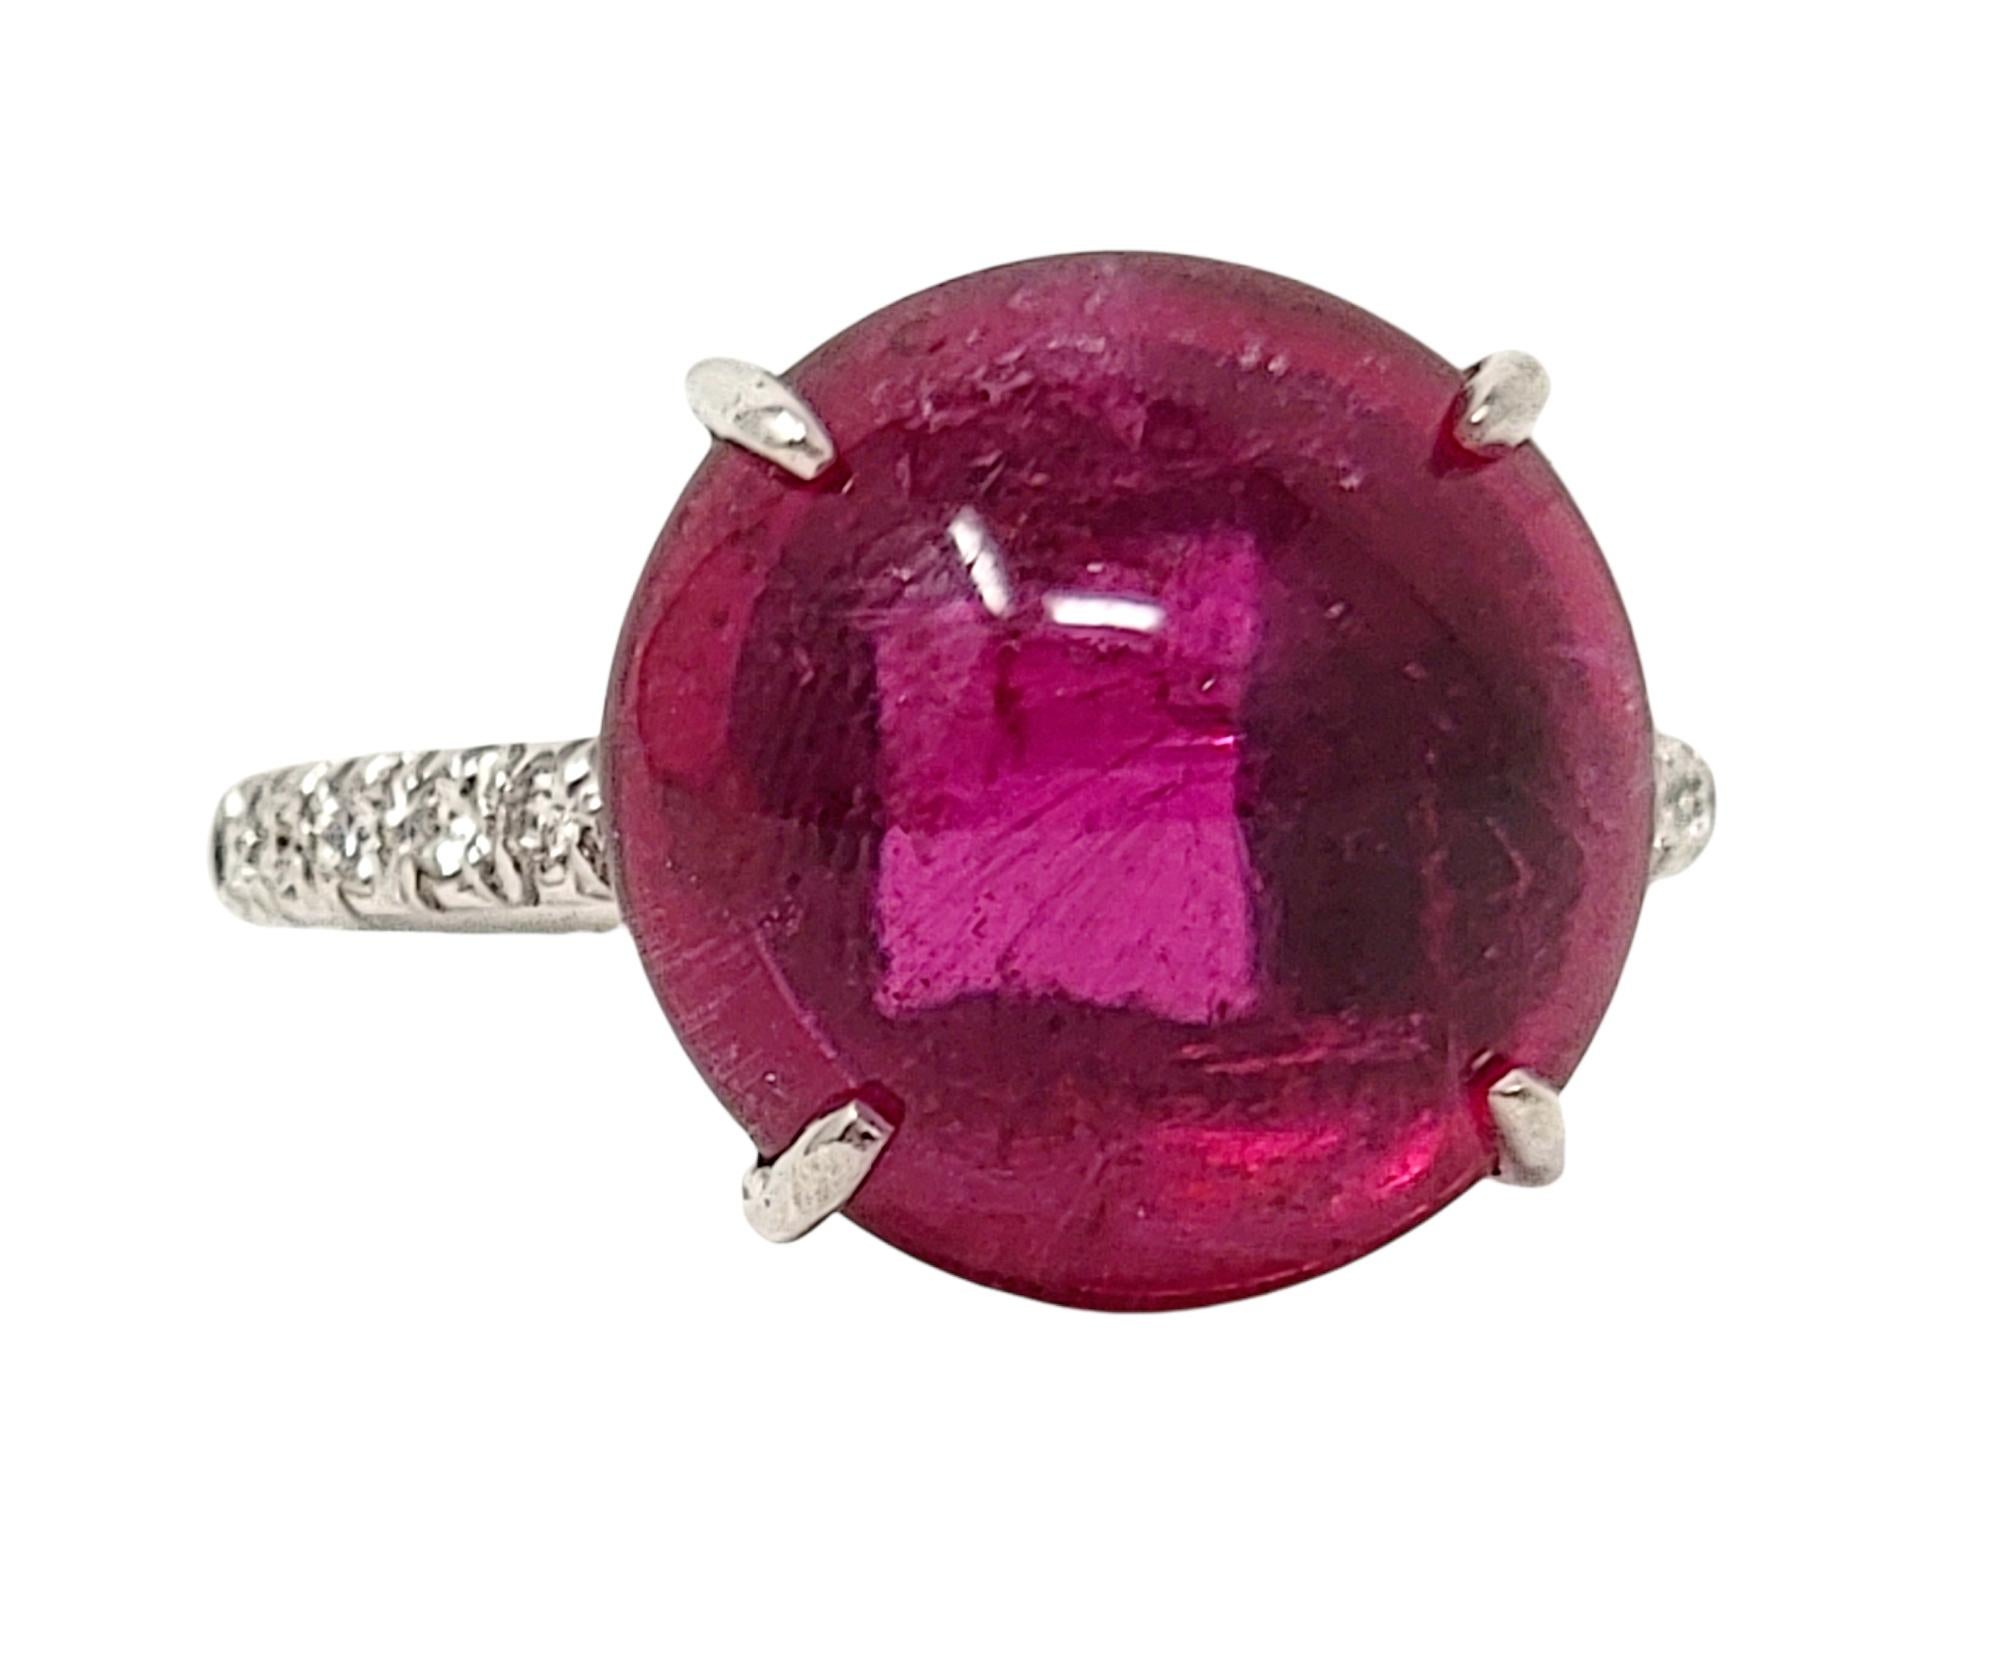 Ring size: 6

Stunning rubelite and diamond cocktail ring bursting with brilliant color! This gorgeous and unique piece features a single round cabochon rubelite stone 4 prong set at the center of the piece. The vibrant stone is an amazing